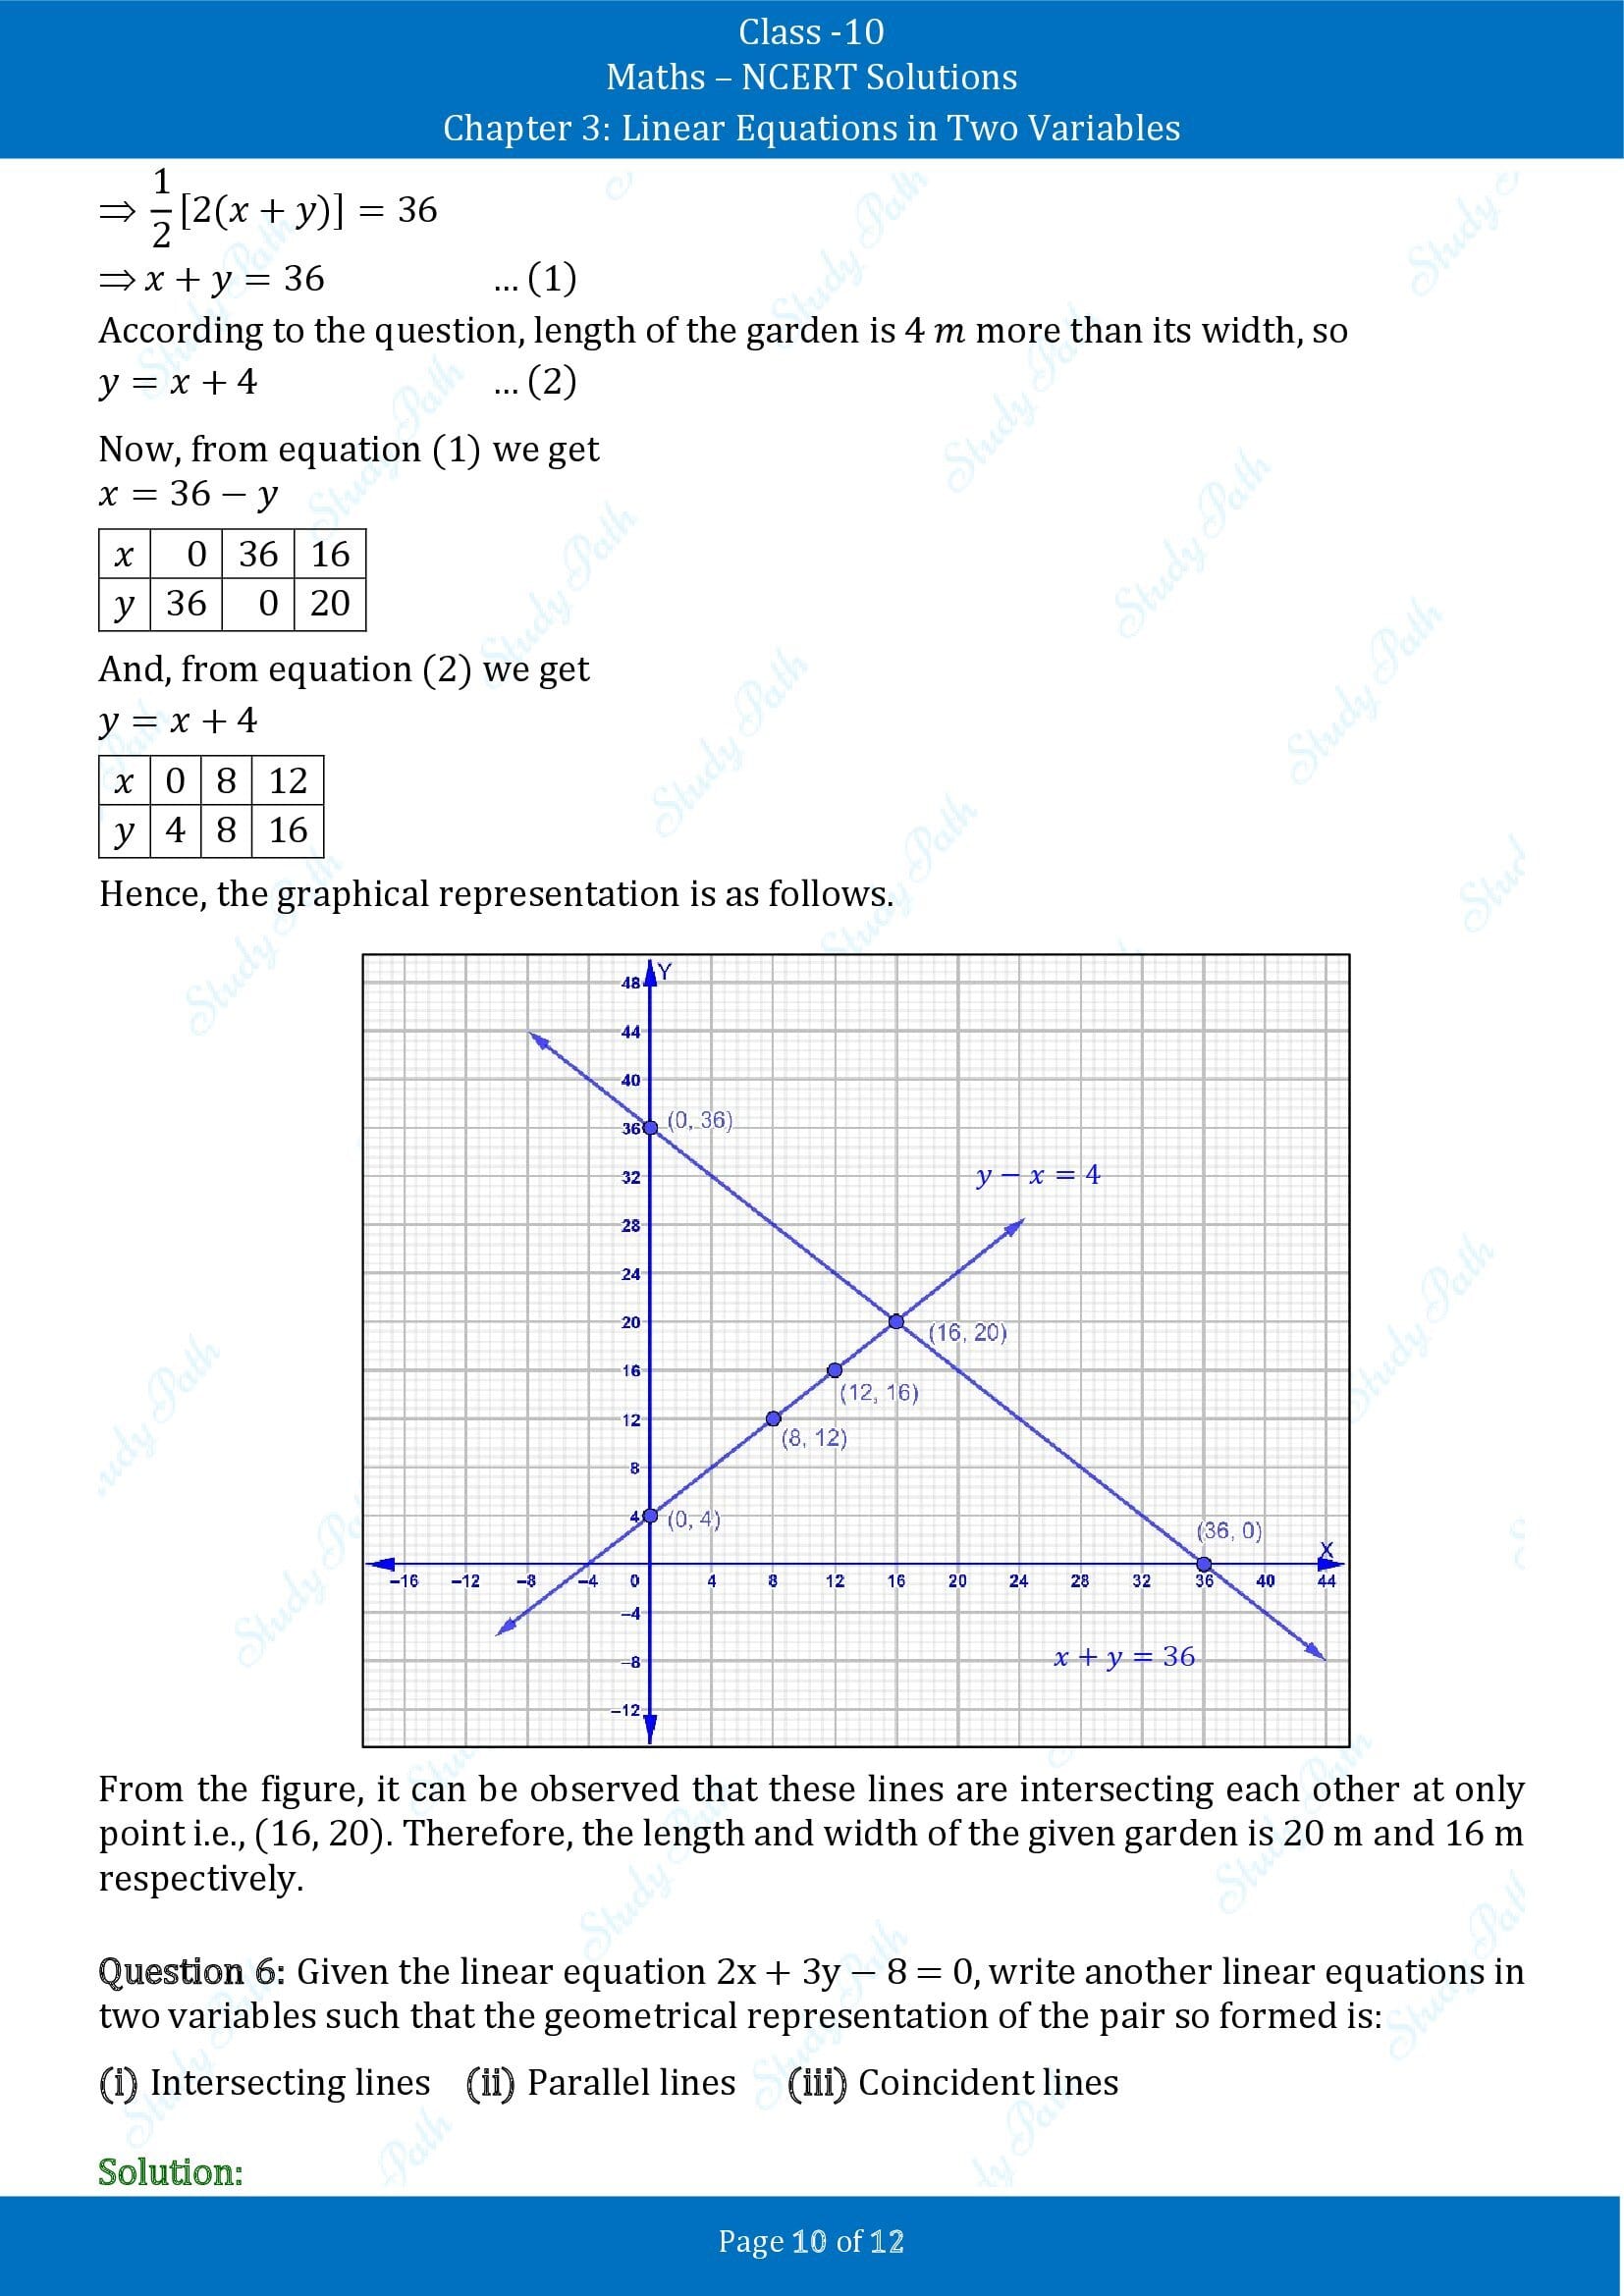 NCERT Solutions for Class 10 Maths Chapter 3 Linear Equations in Two Variables Exercise 3.2 00010